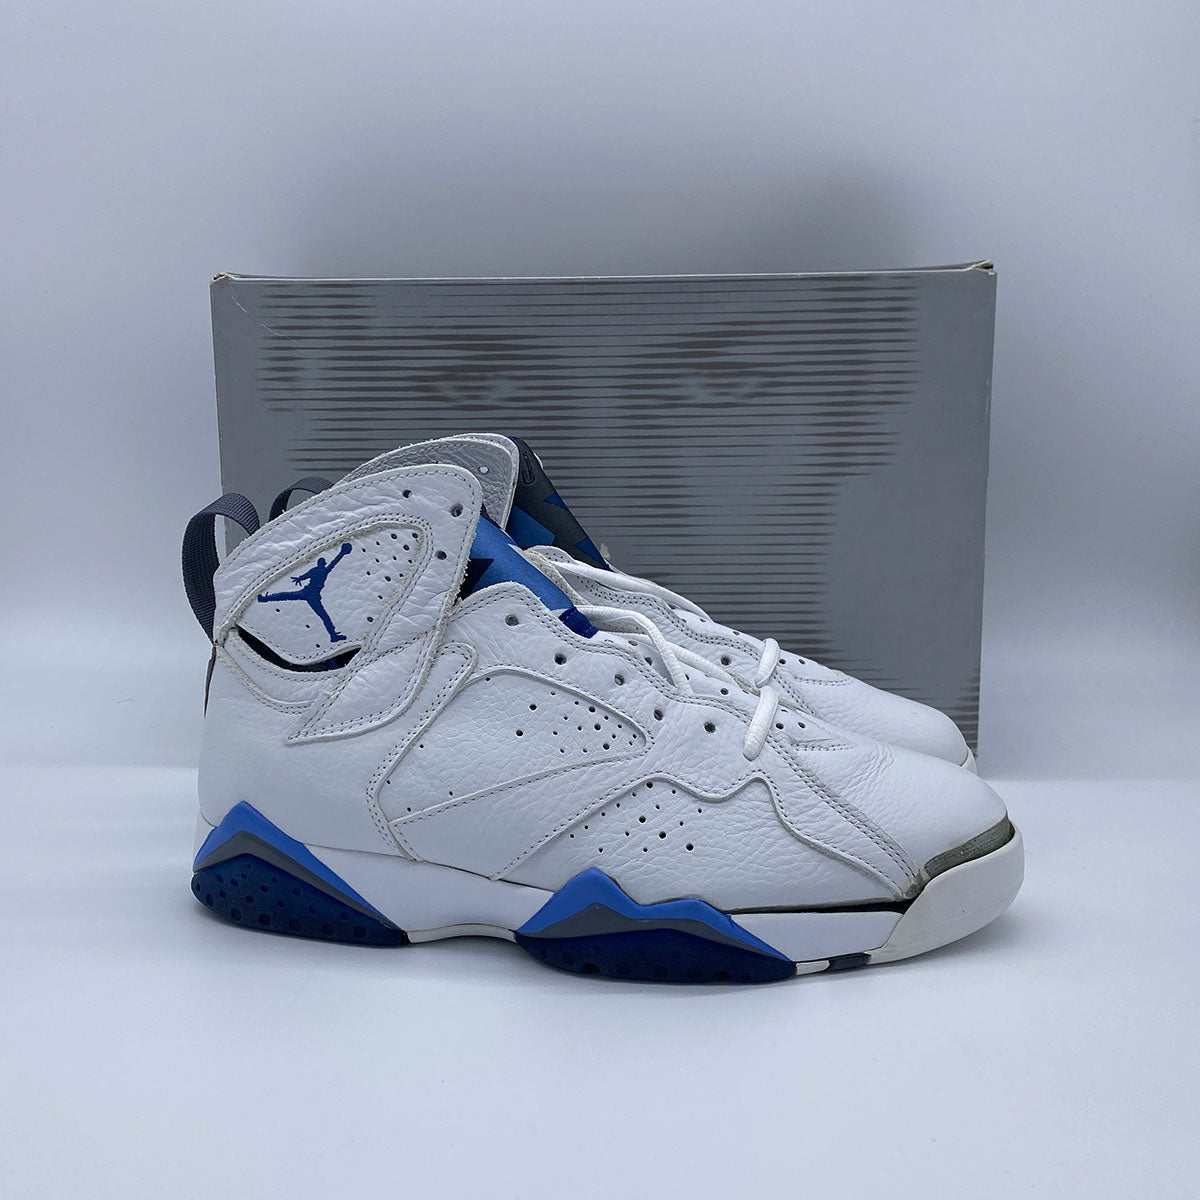 Air Jordan 7 Retro French Blue 2002 Release size 9.5 (New with DEFECT) - KickzStore